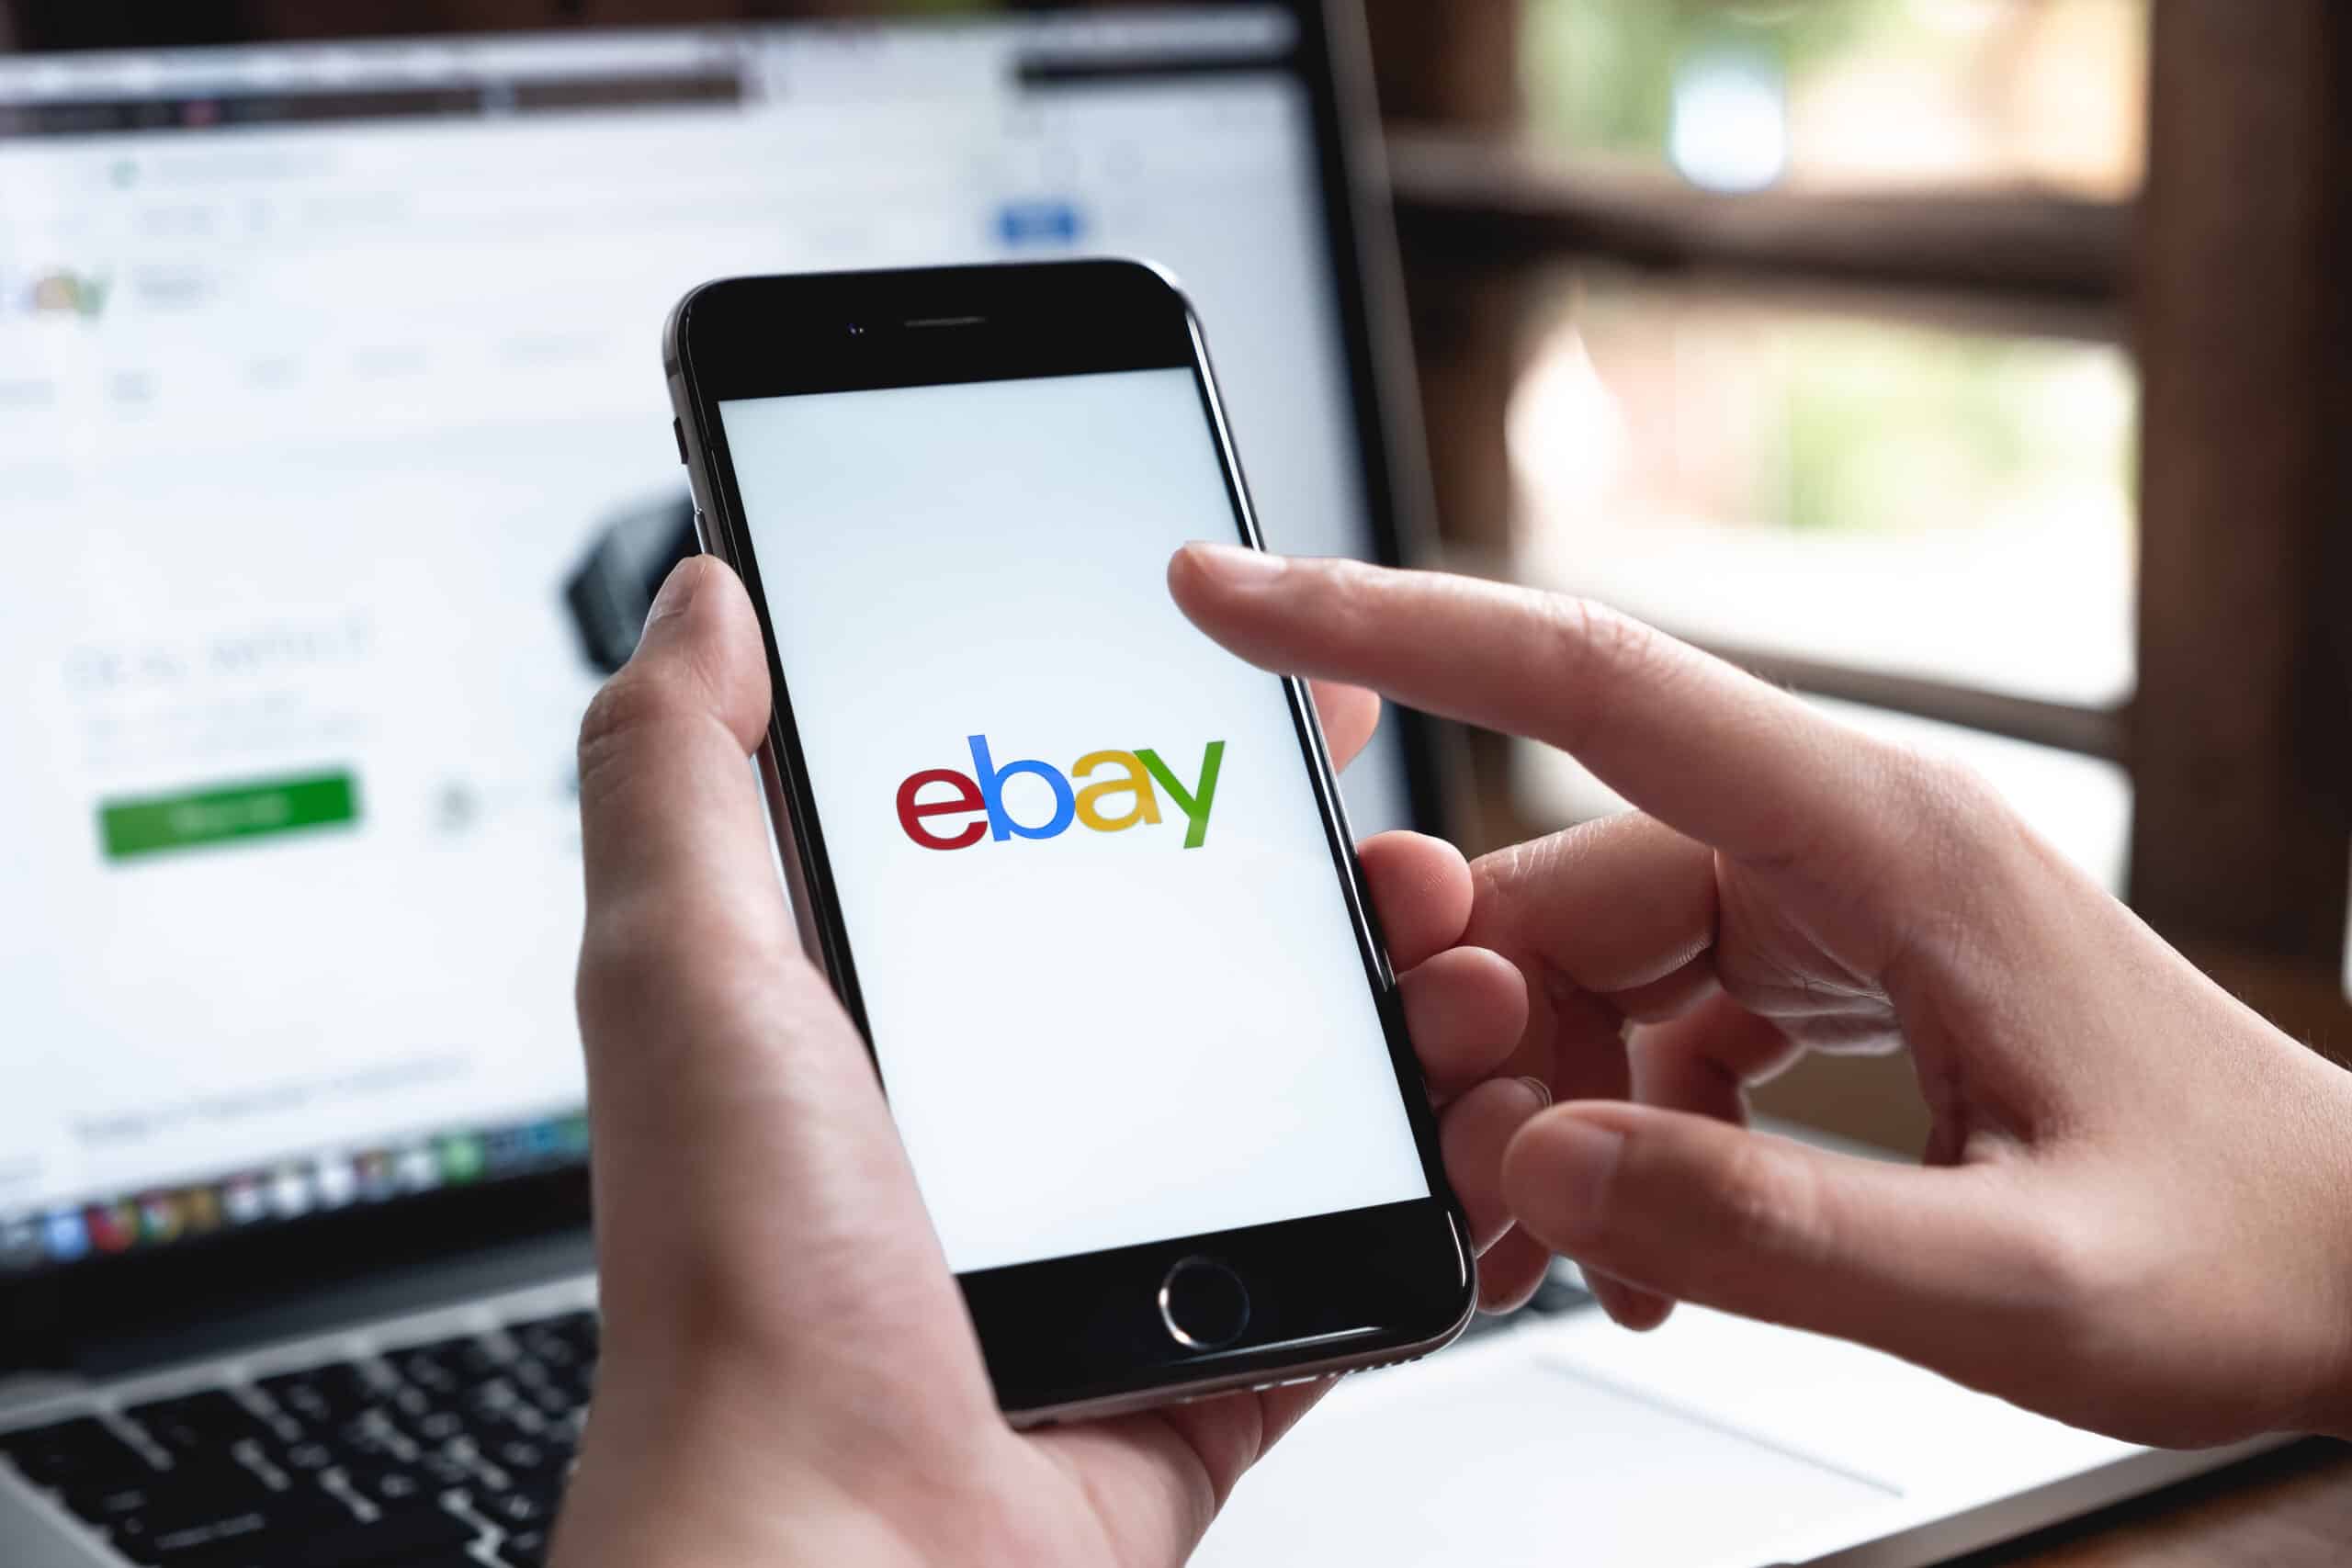 ebay-rolls-out-two-new-search-tool-features-for-its-mobile-app